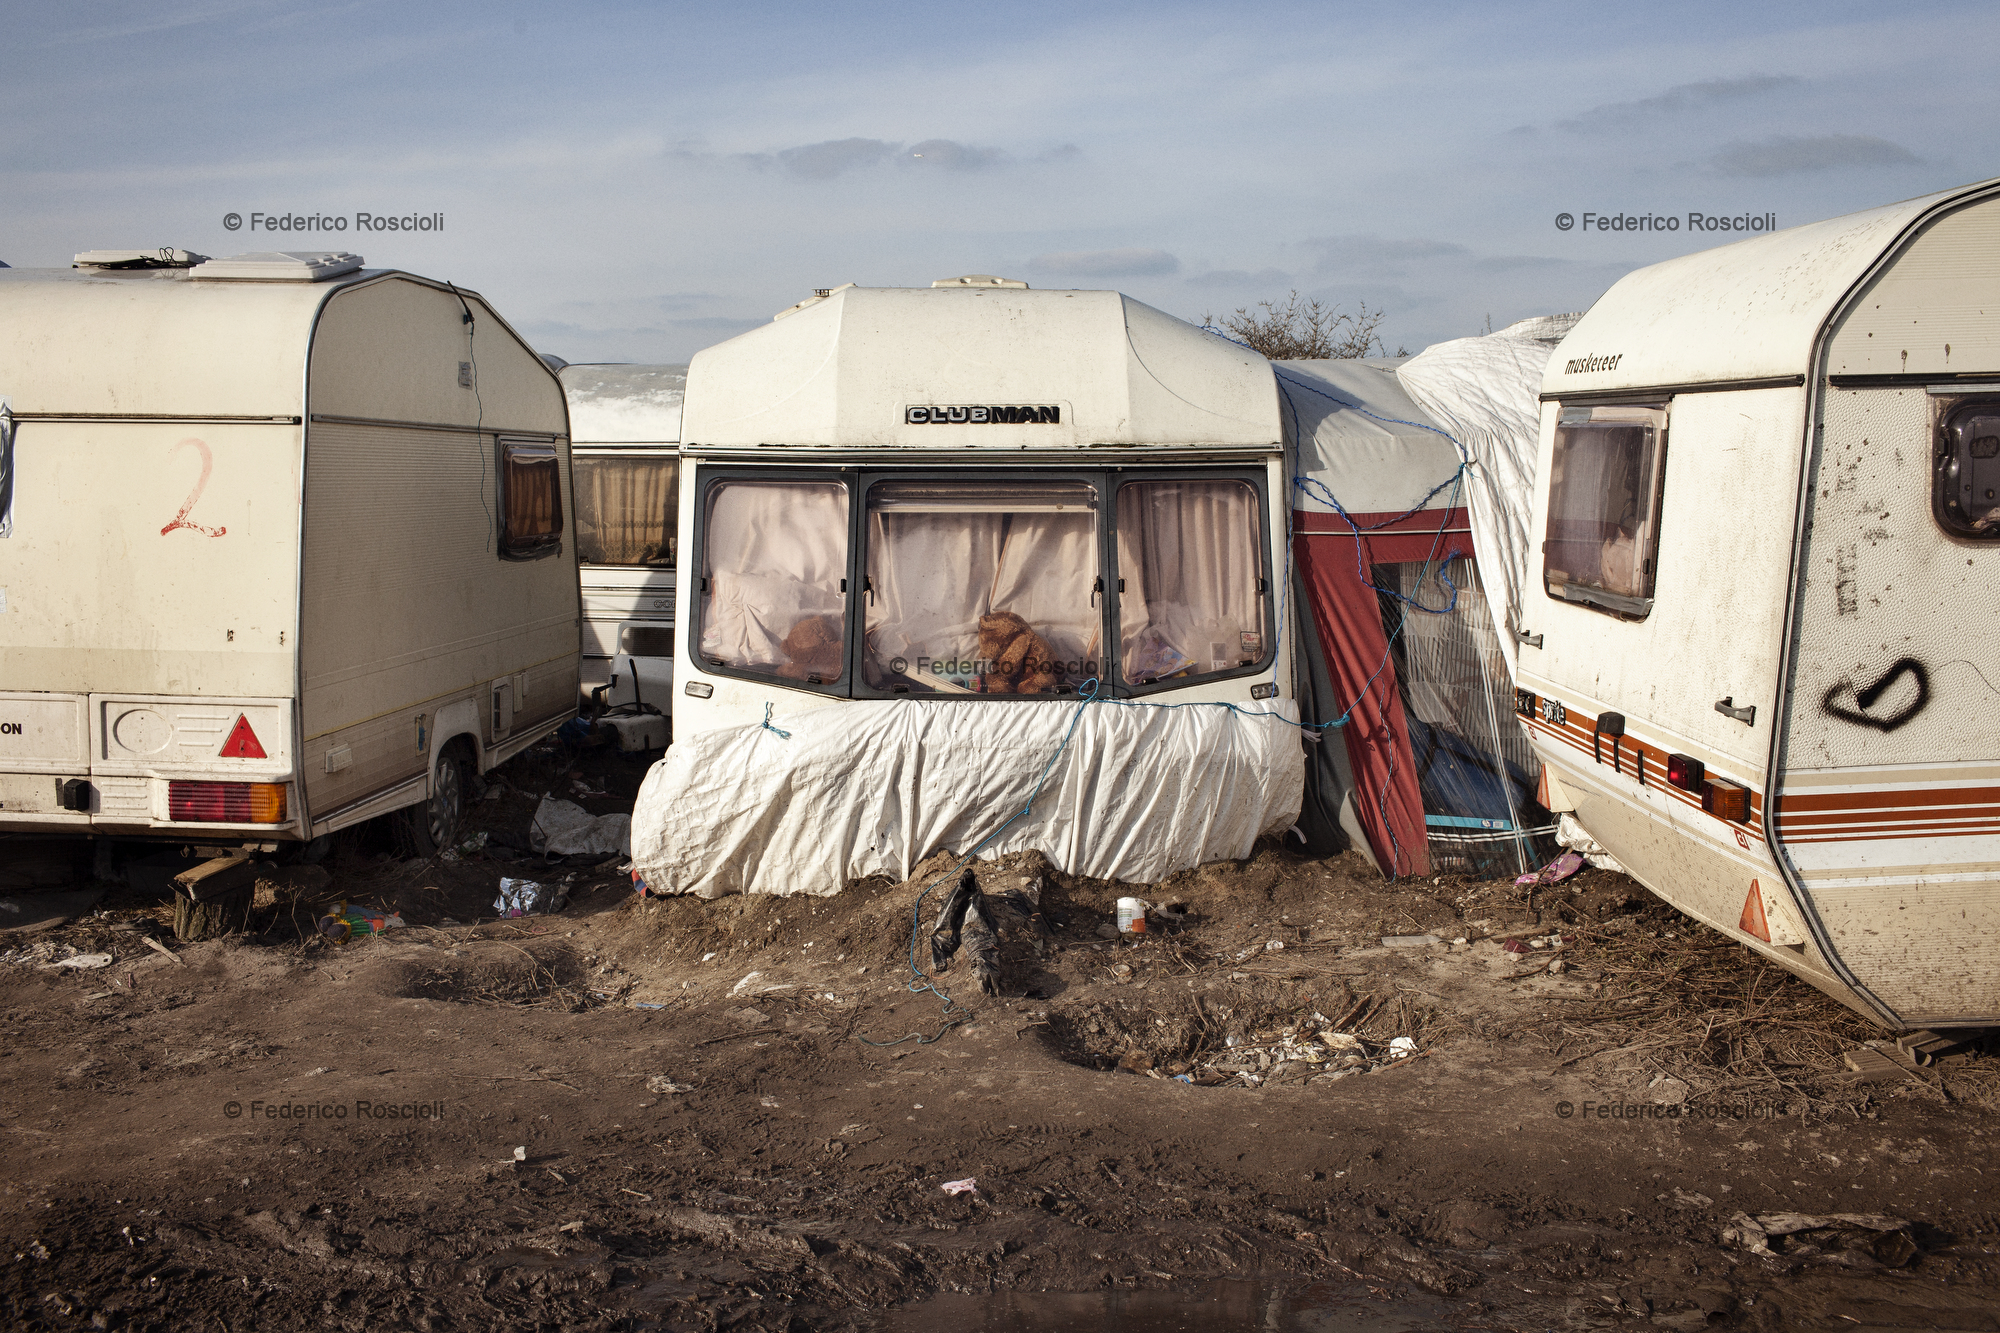 Calais, France. February 27, 2016. Families live in caravans in a specific area fo the camp. There are around 300 families hosted.